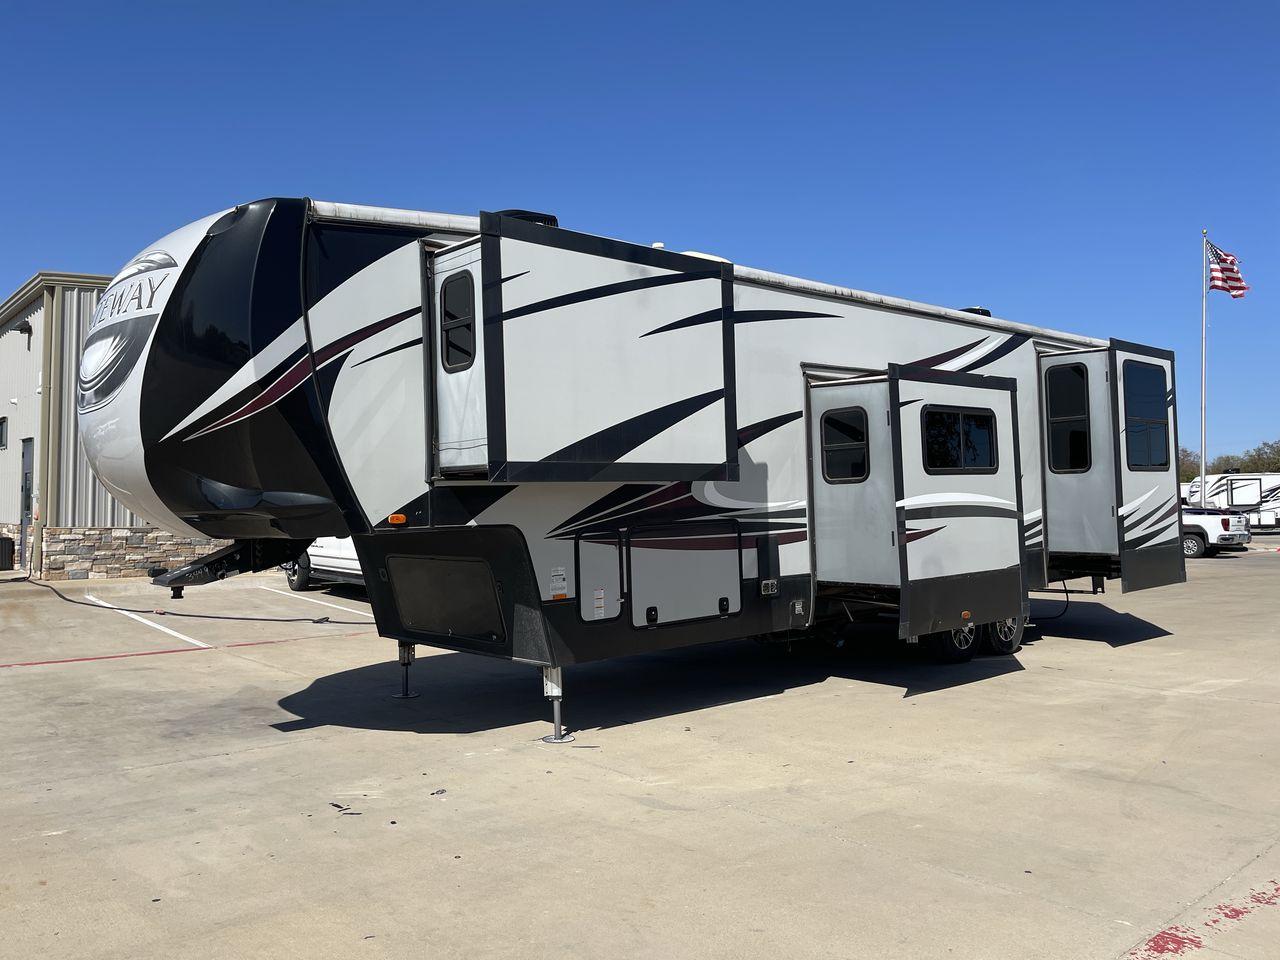 2017 TAN GATEWAY 3712RDMB - (5SFSG4228HE) , Length: 39.5 ft. | Dry Weight: 13,680 lbs. | Gross Weight: 15,500 lbs. | Slides: 4 transmission, located at 4319 N Main St, Cleburne, TX, 76033, (817) 678-5133, 32.385960, -97.391212 - Explore more reasons that emphasize the benefits of having this RV as your own. (1) It has Two TVs for entertainment in both the living area and the master bedroom. (2) It has Outside speakers bring the music outdoors for alfresco enjoyment. (3) It has a sleek and durable solid surface counter - Photo #23